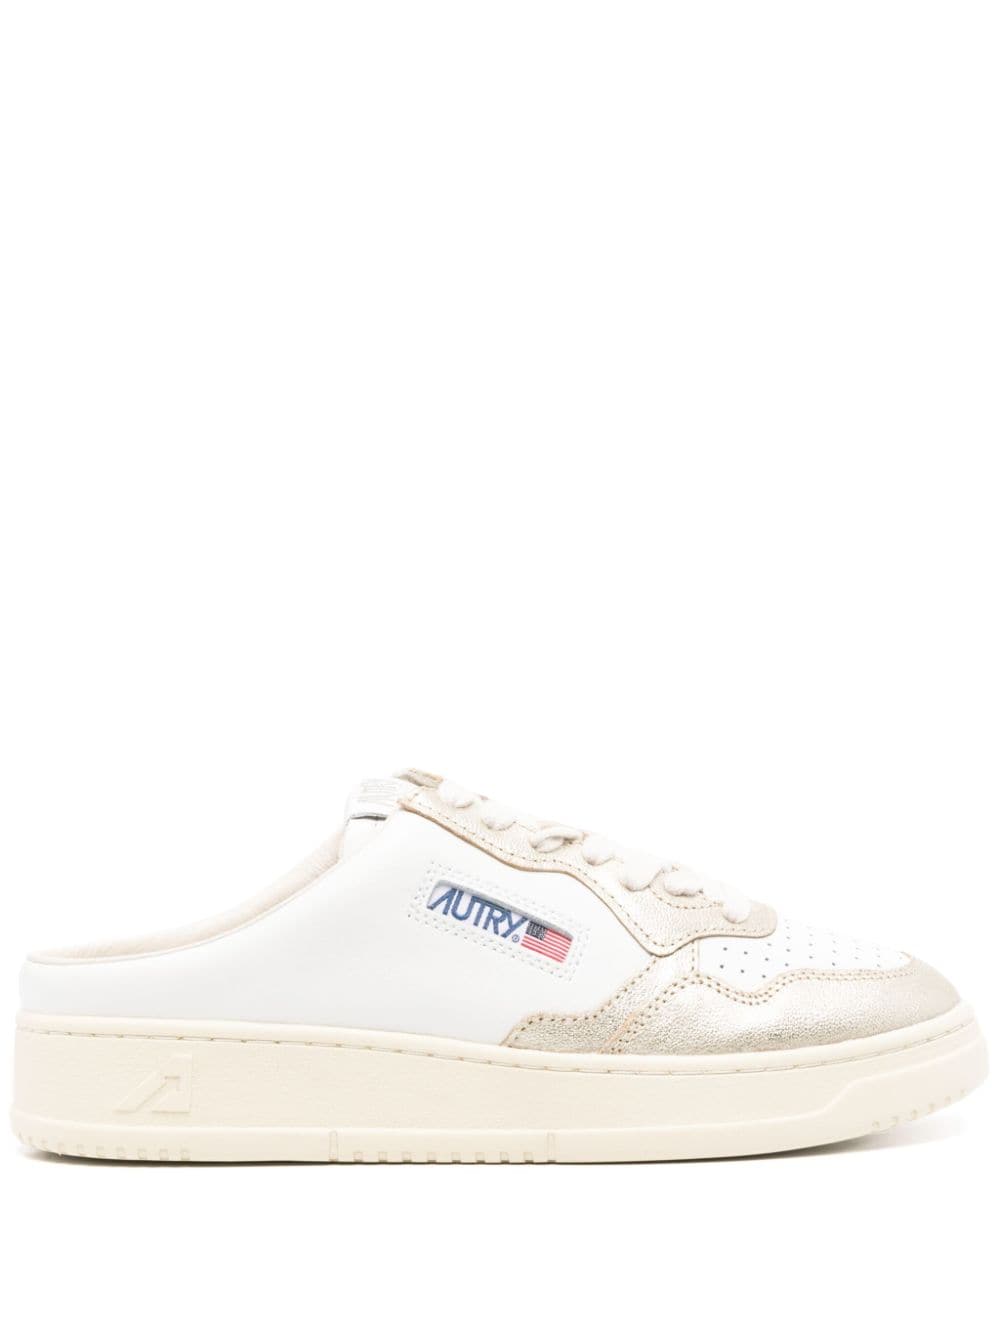 AUTRY AUTRY- Mule Low Leather Sneakers